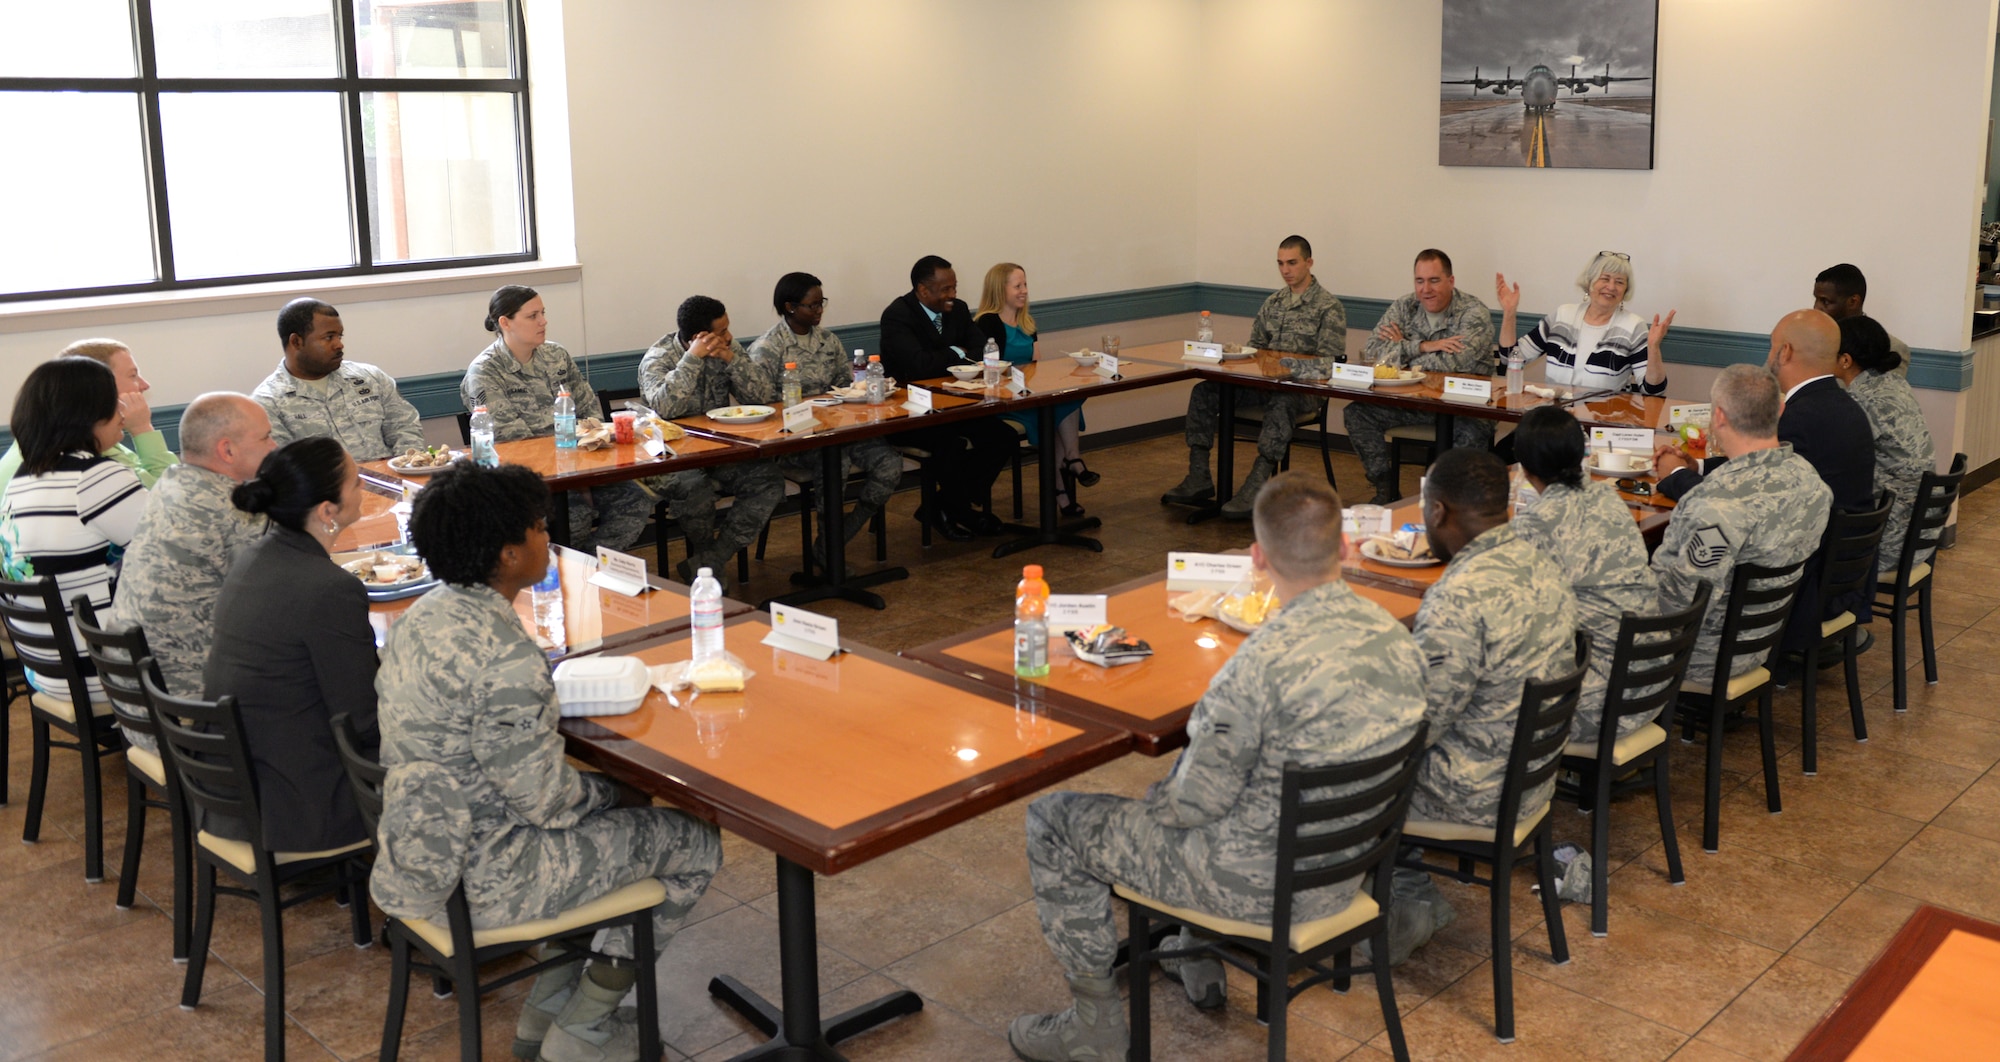 Mary Dixon, Defense Manpower Data Center director, speaks with members of Team Barksdale about operational systems, ID cards and the security they provide on Barksdale Air Force Base, Louisiana, May 28, 2015. Dixon visited the base from the Office of the Under Secretary of Defense Personnel & Readiness to present the 2nd Force Support Squadron with the 2014 Real-time Automated Personnel Identification Data System Site of the Year Award. The award is presented to a site that greatly exceeds standards by adopting new procedures or tools that benefit customer service. The 2nd FSS team was chosen above more than 1,640 teams throughout the Department of Defense. (U.S. Air Force photo/Airman 1st Class Curt Beach)